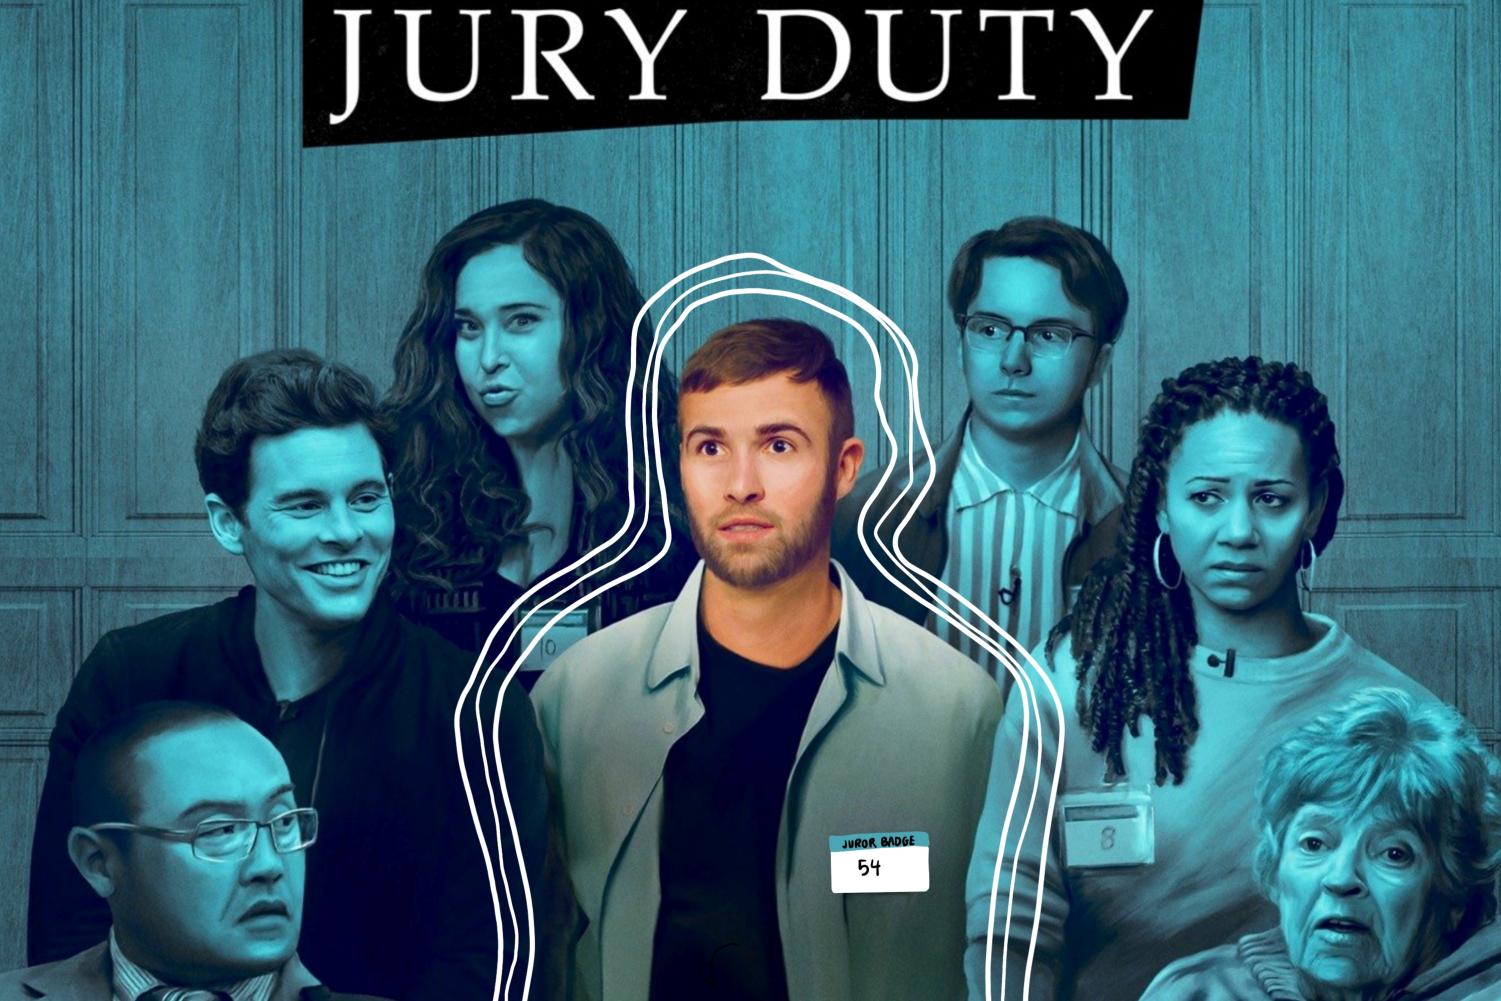 Reel Thoughts ‘Jury Duty’ could be the most wholesome show of 2023 ‘Jury Duty’ is quite